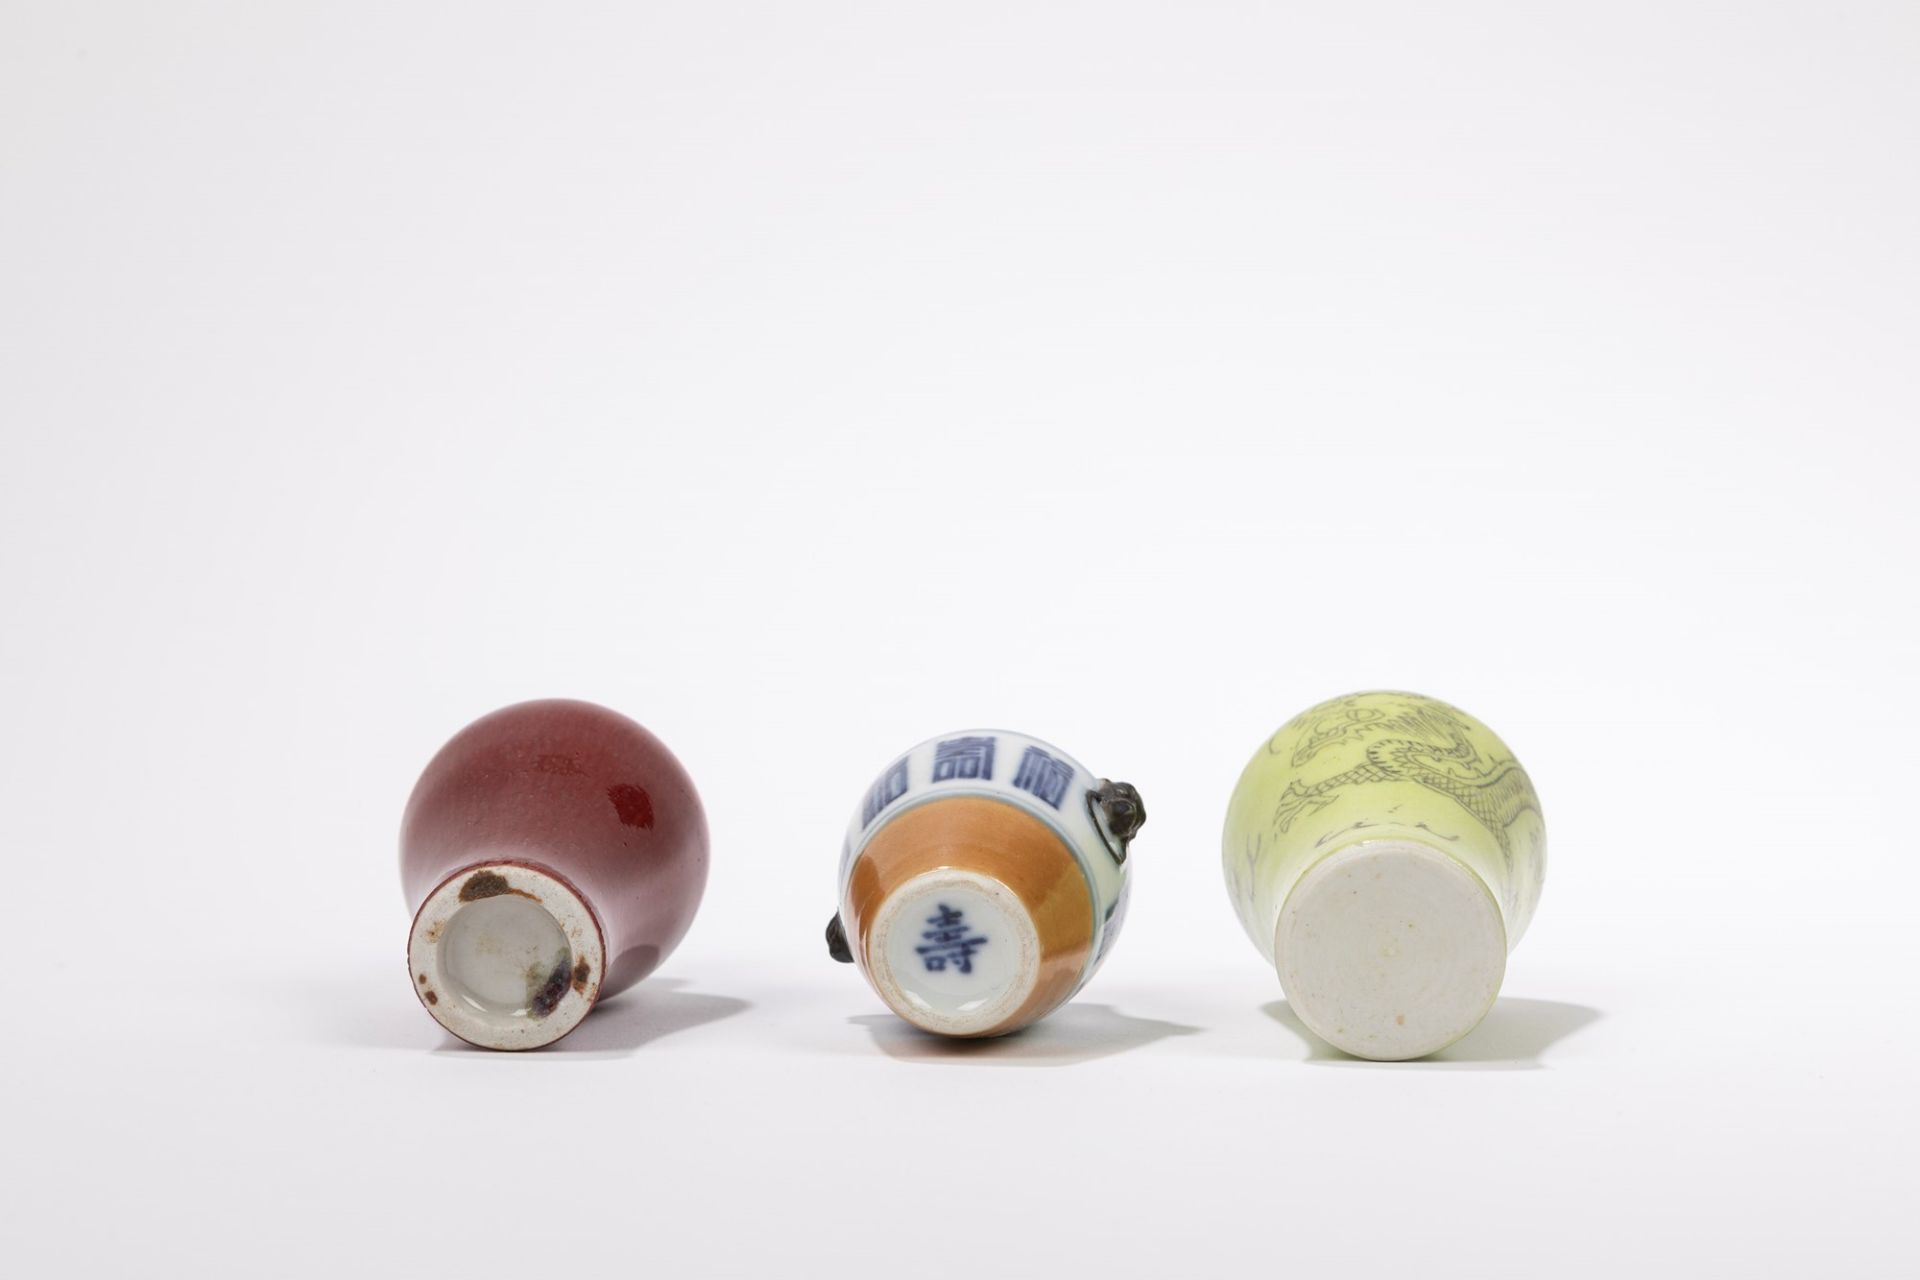 THREE PORCELAIN SNUFF BOTTLES, China, Qing dynasty, 19th century - Image 2 of 2